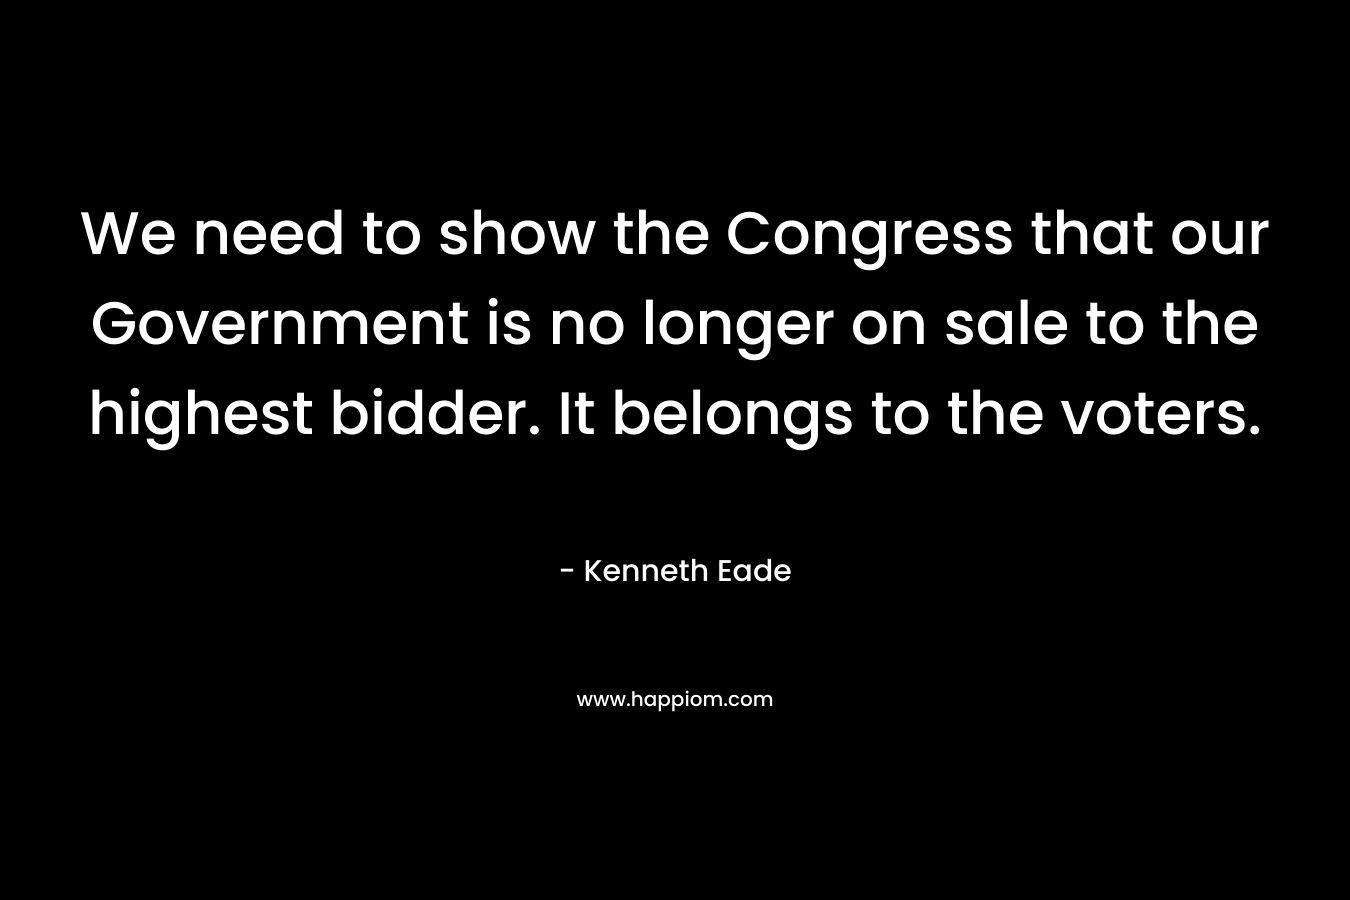 We need to show the Congress that our Government is no longer on sale to the highest bidder. It belongs to the voters. – Kenneth Eade